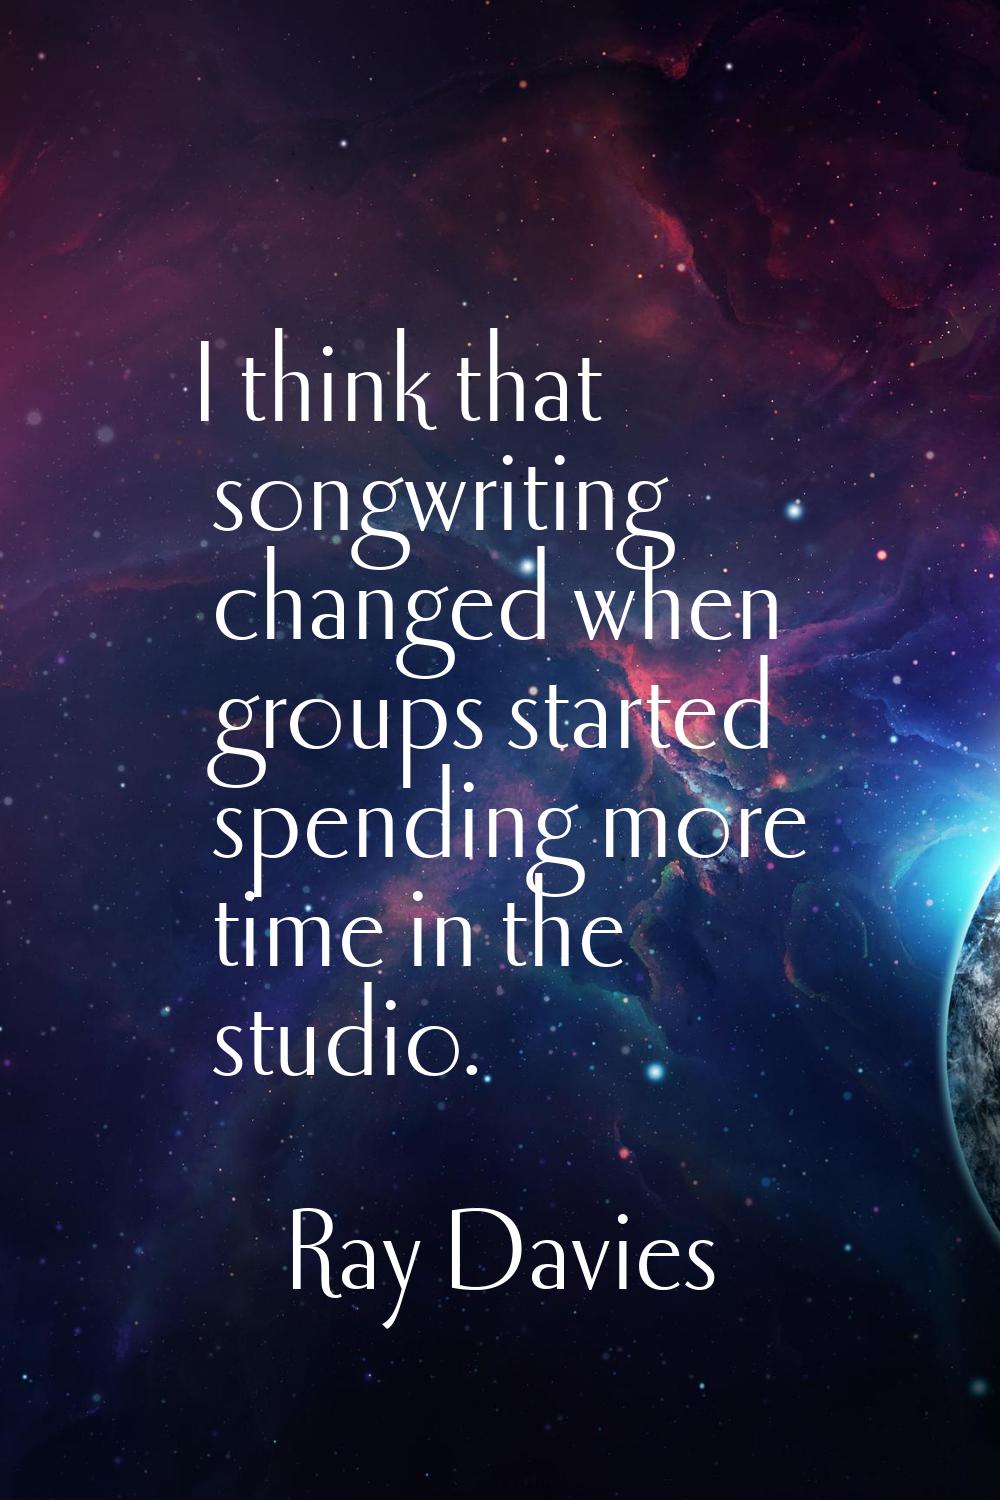 I think that songwriting changed when groups started spending more time in the studio.